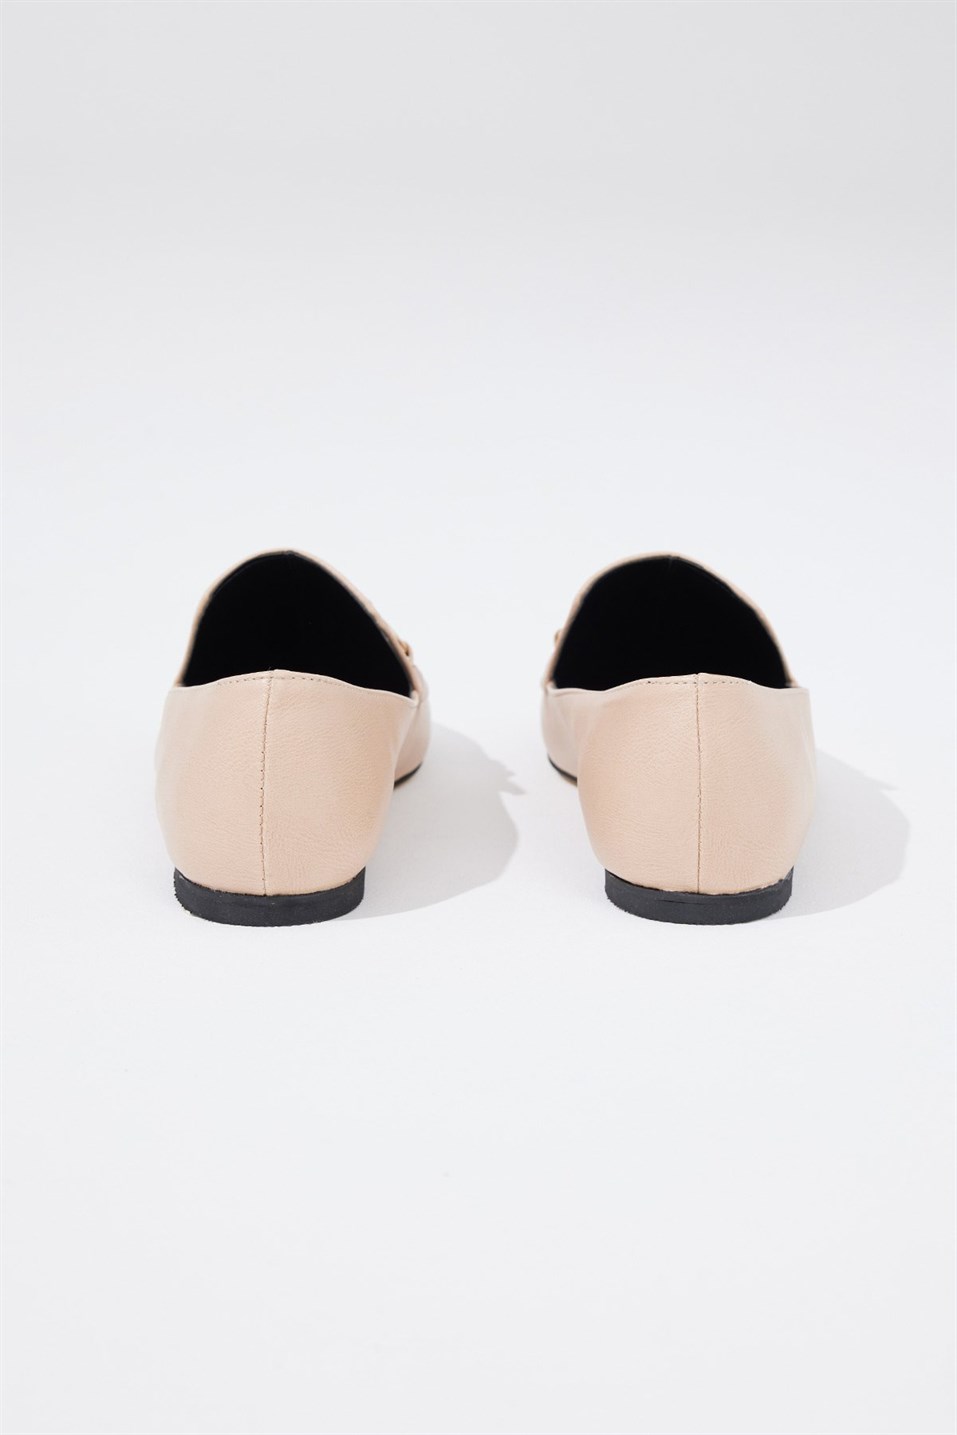 Nude Loafer